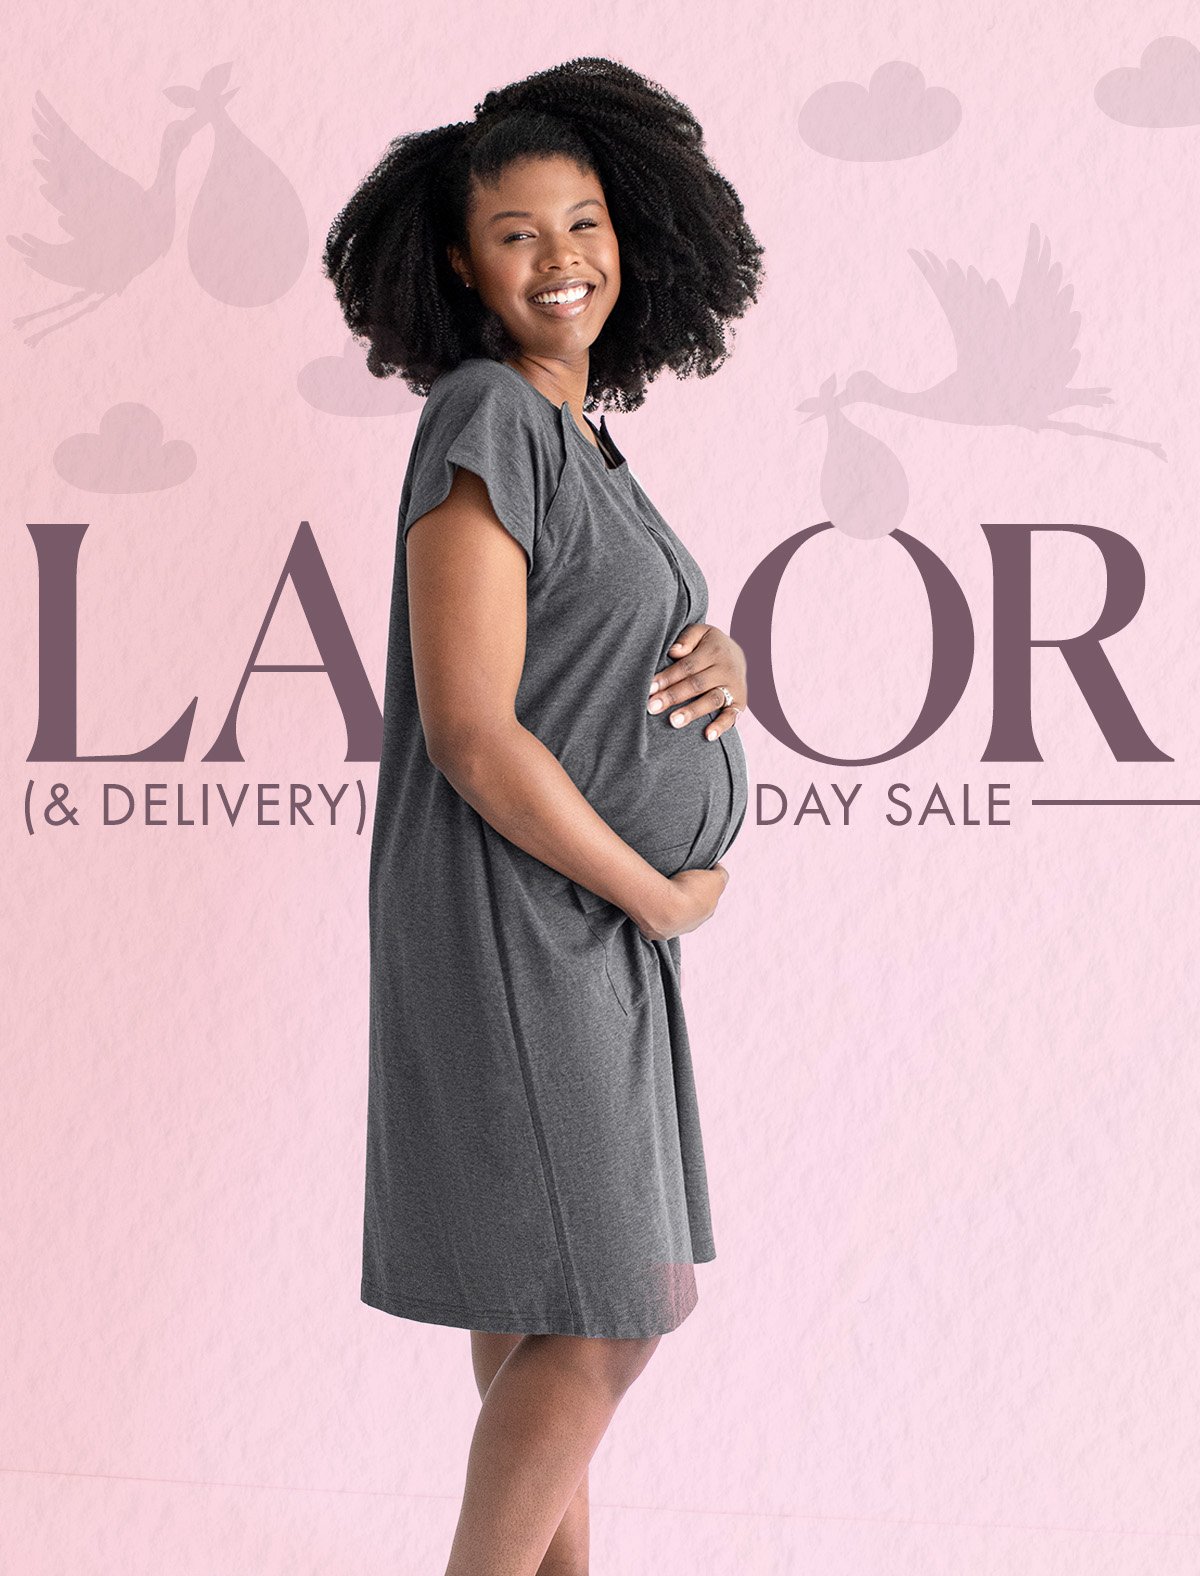 Labor (& Delivery) Day Sale: Get 25% off the Labor Essentials Collection